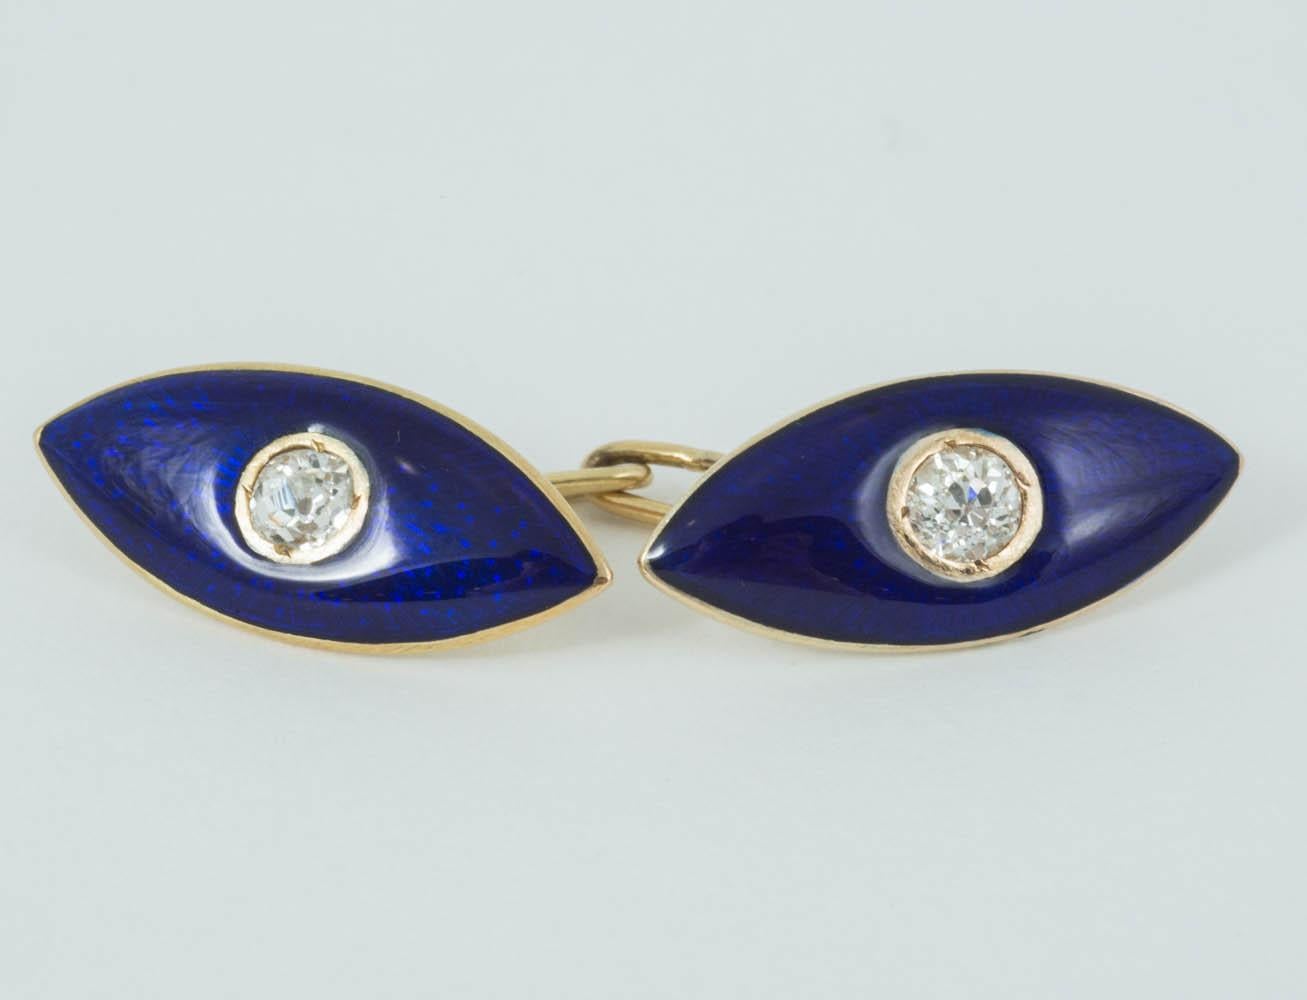 Round Cut Cufflinks in 18 Carat Gold, Central Diamond and Blue Enamel, English circa 1890 For Sale